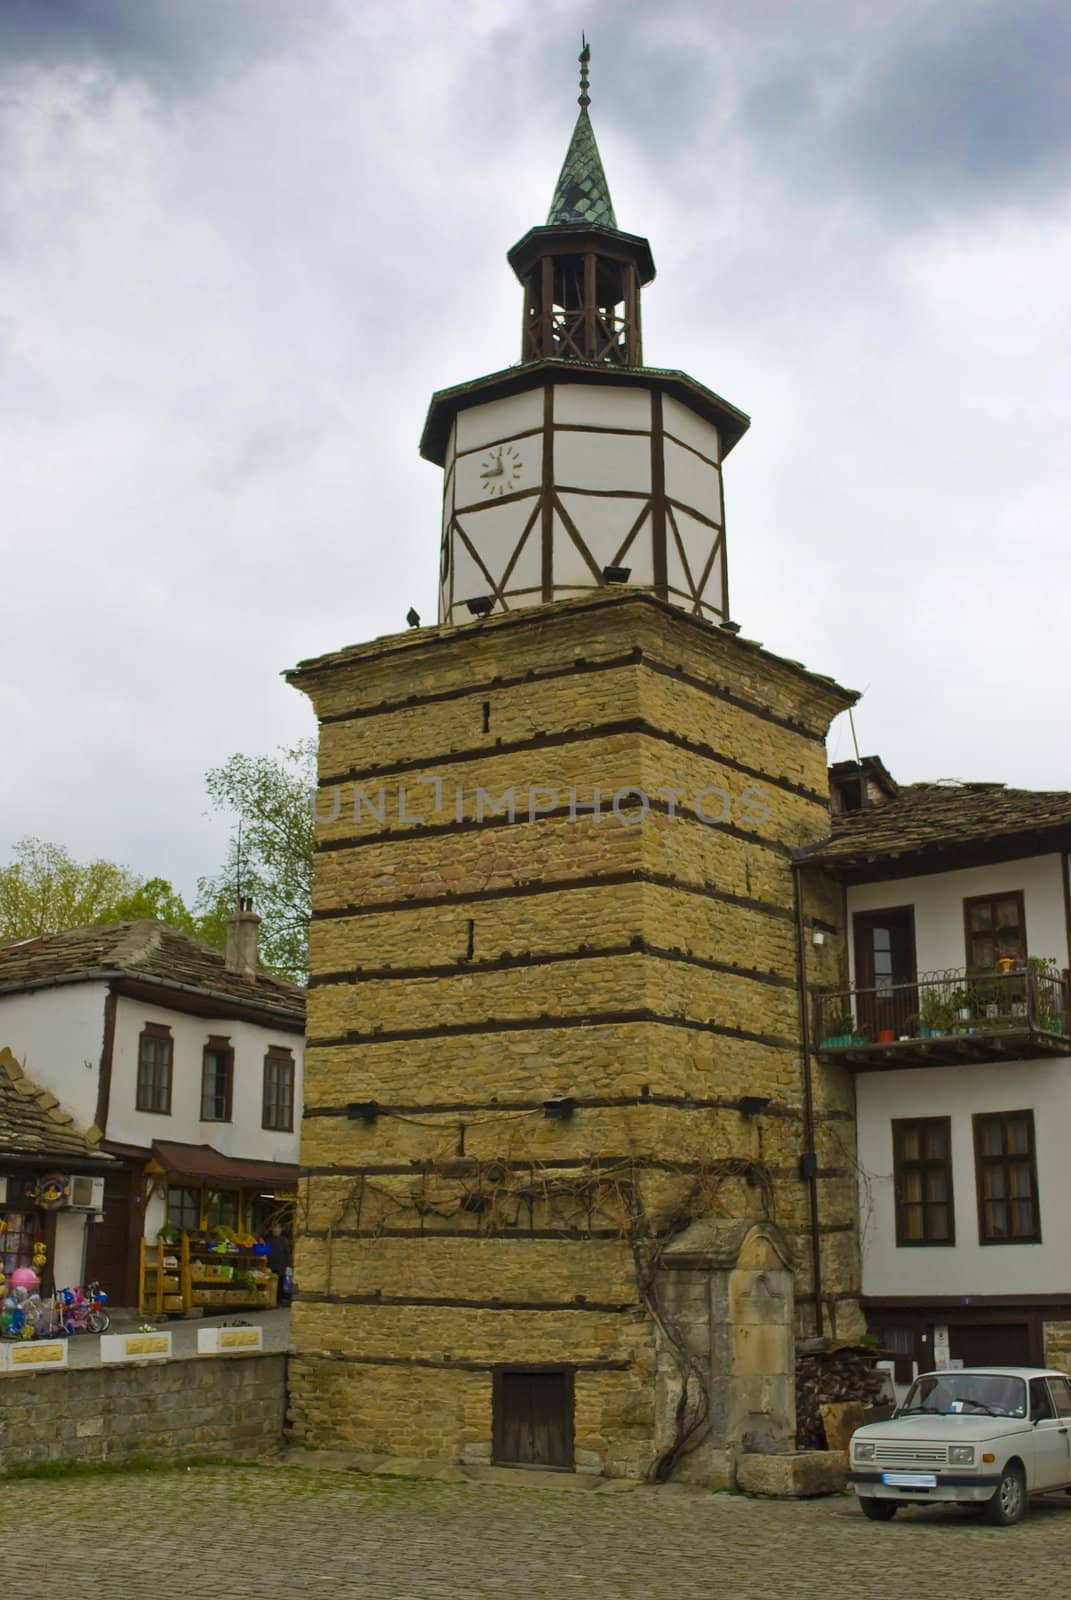 Tryavna and clock tower � old style historical city in North Bulgaria